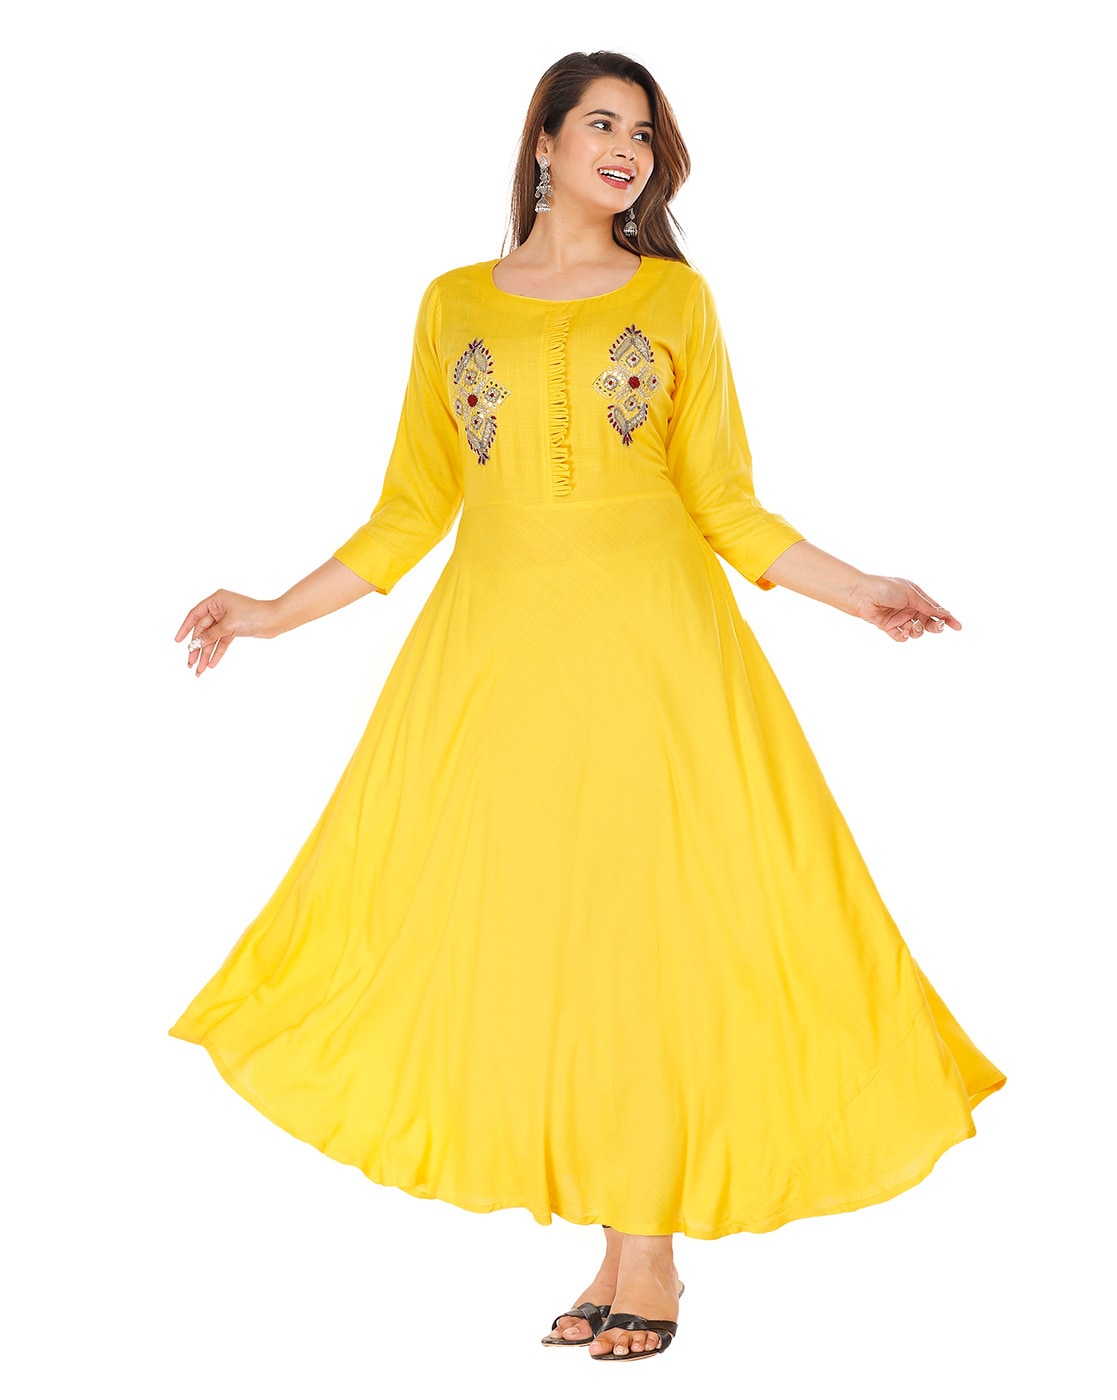 M.A Crystal/Laddu Gopal Designer Dress with Pagdi/Gopal Ji Desinger Dress/Yellow  Colour (Size 5NO / 10 Inches) RK_1142 : Amazon.in: Home & Kitchen